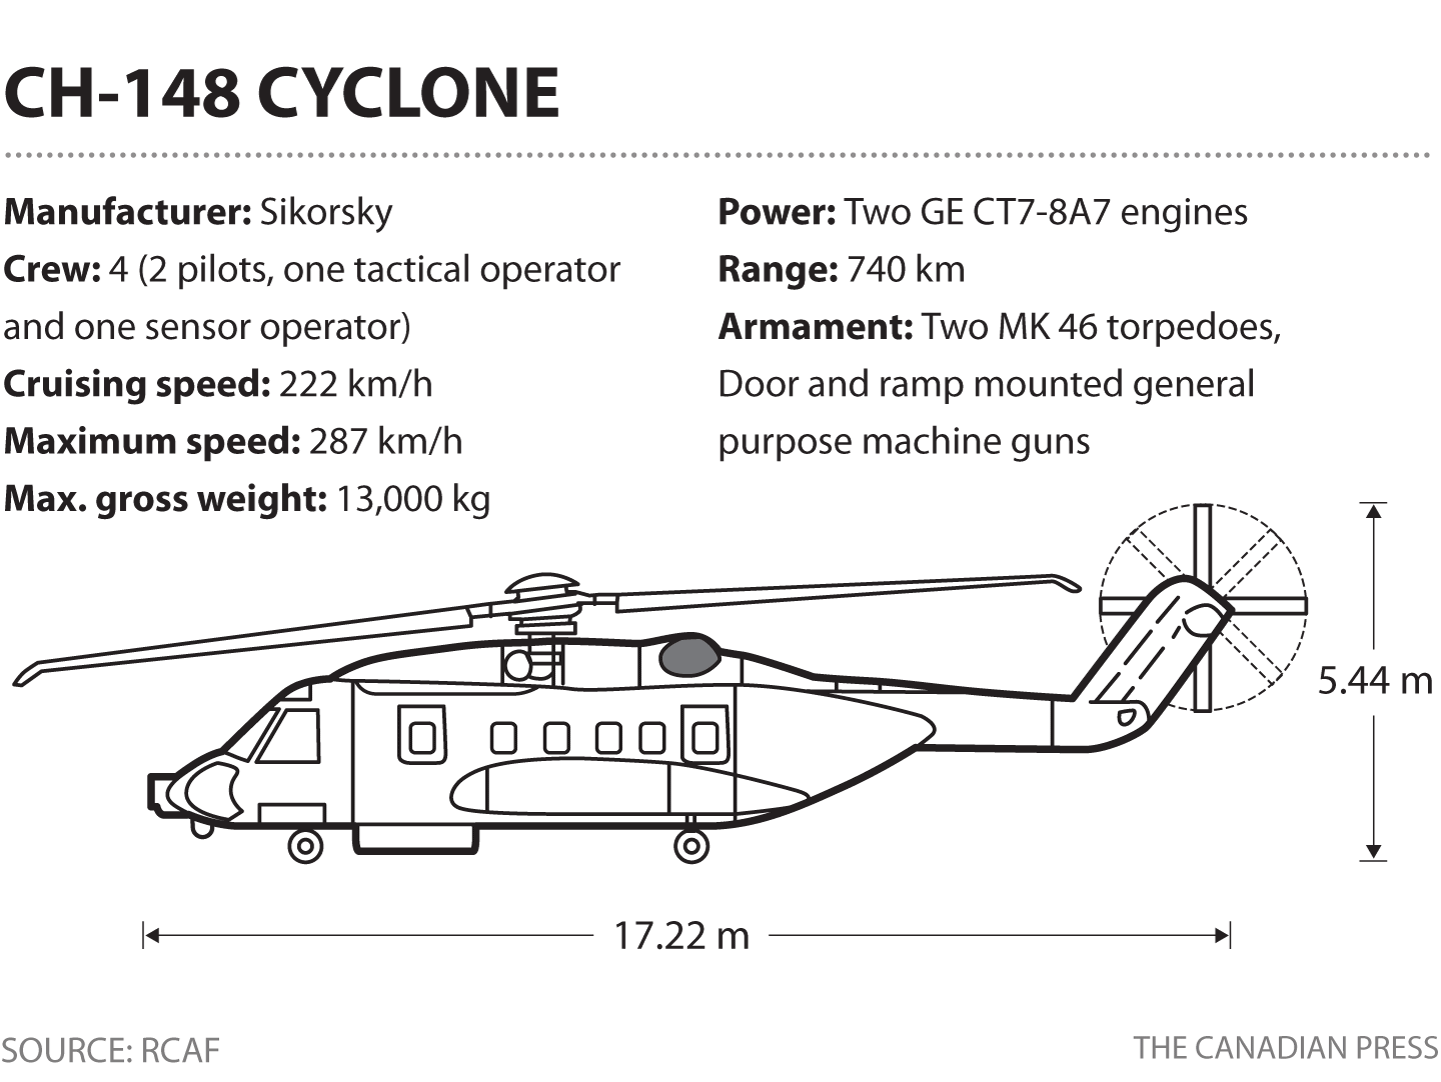 CH-148 CYCLONE SPECIFICATIONS